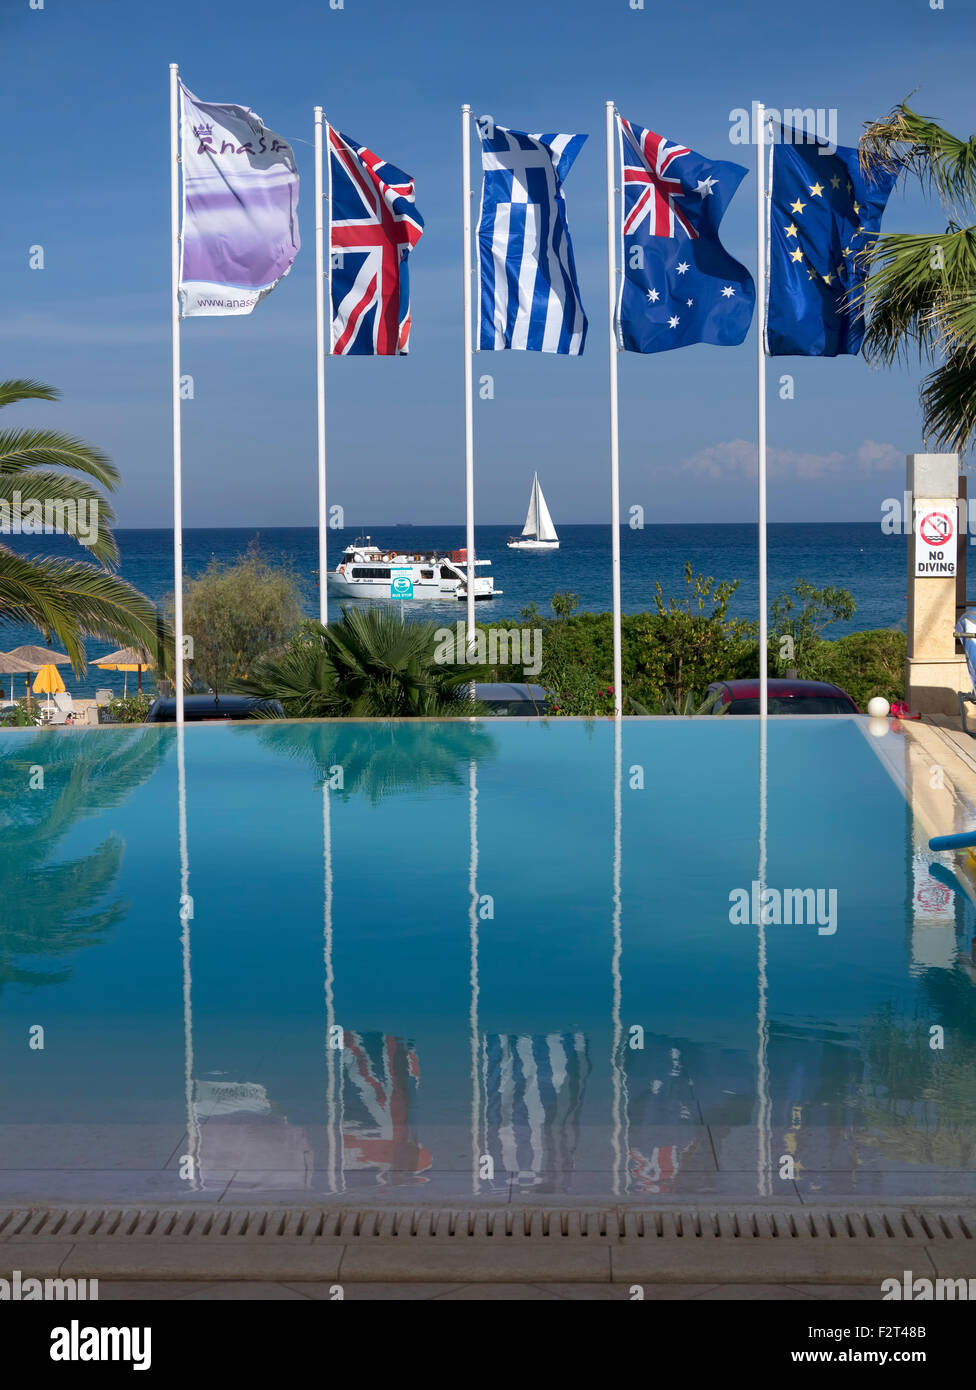 Flags reflected in a swimming pool. Stock Photo